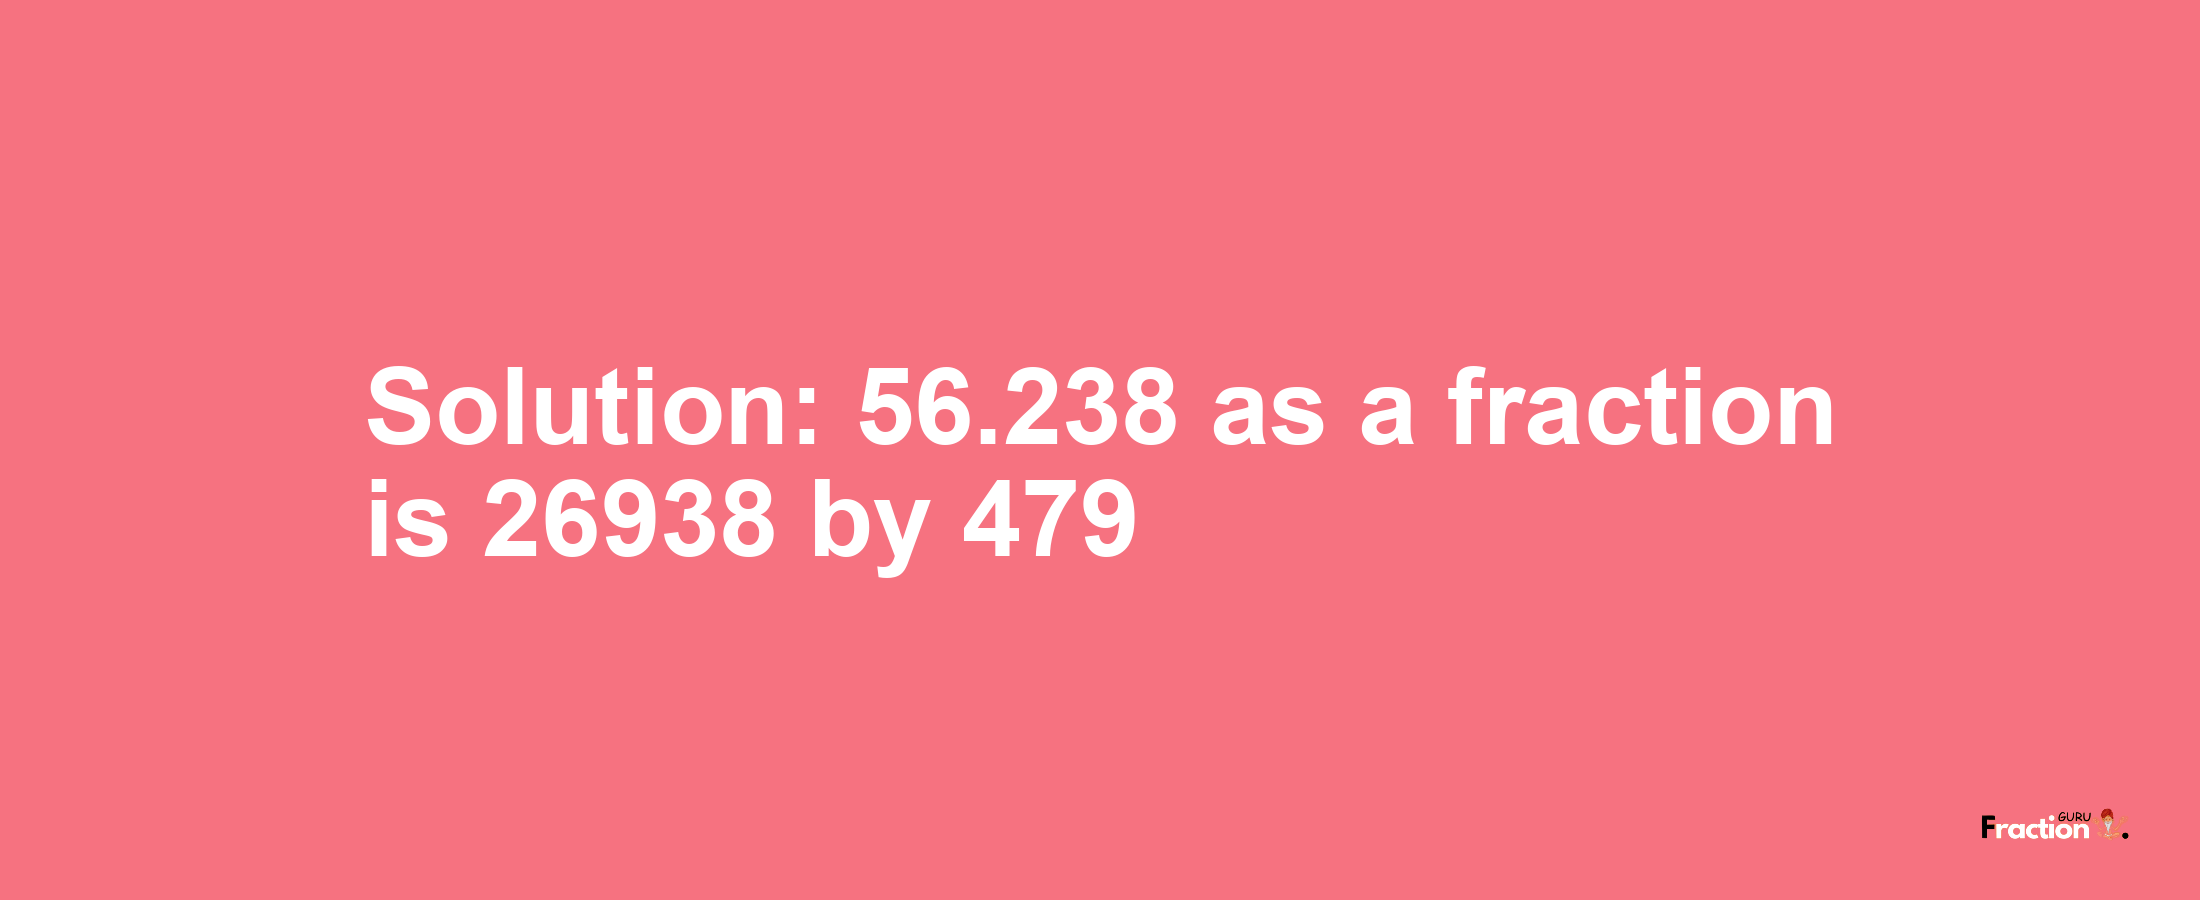 Solution:56.238 as a fraction is 26938/479